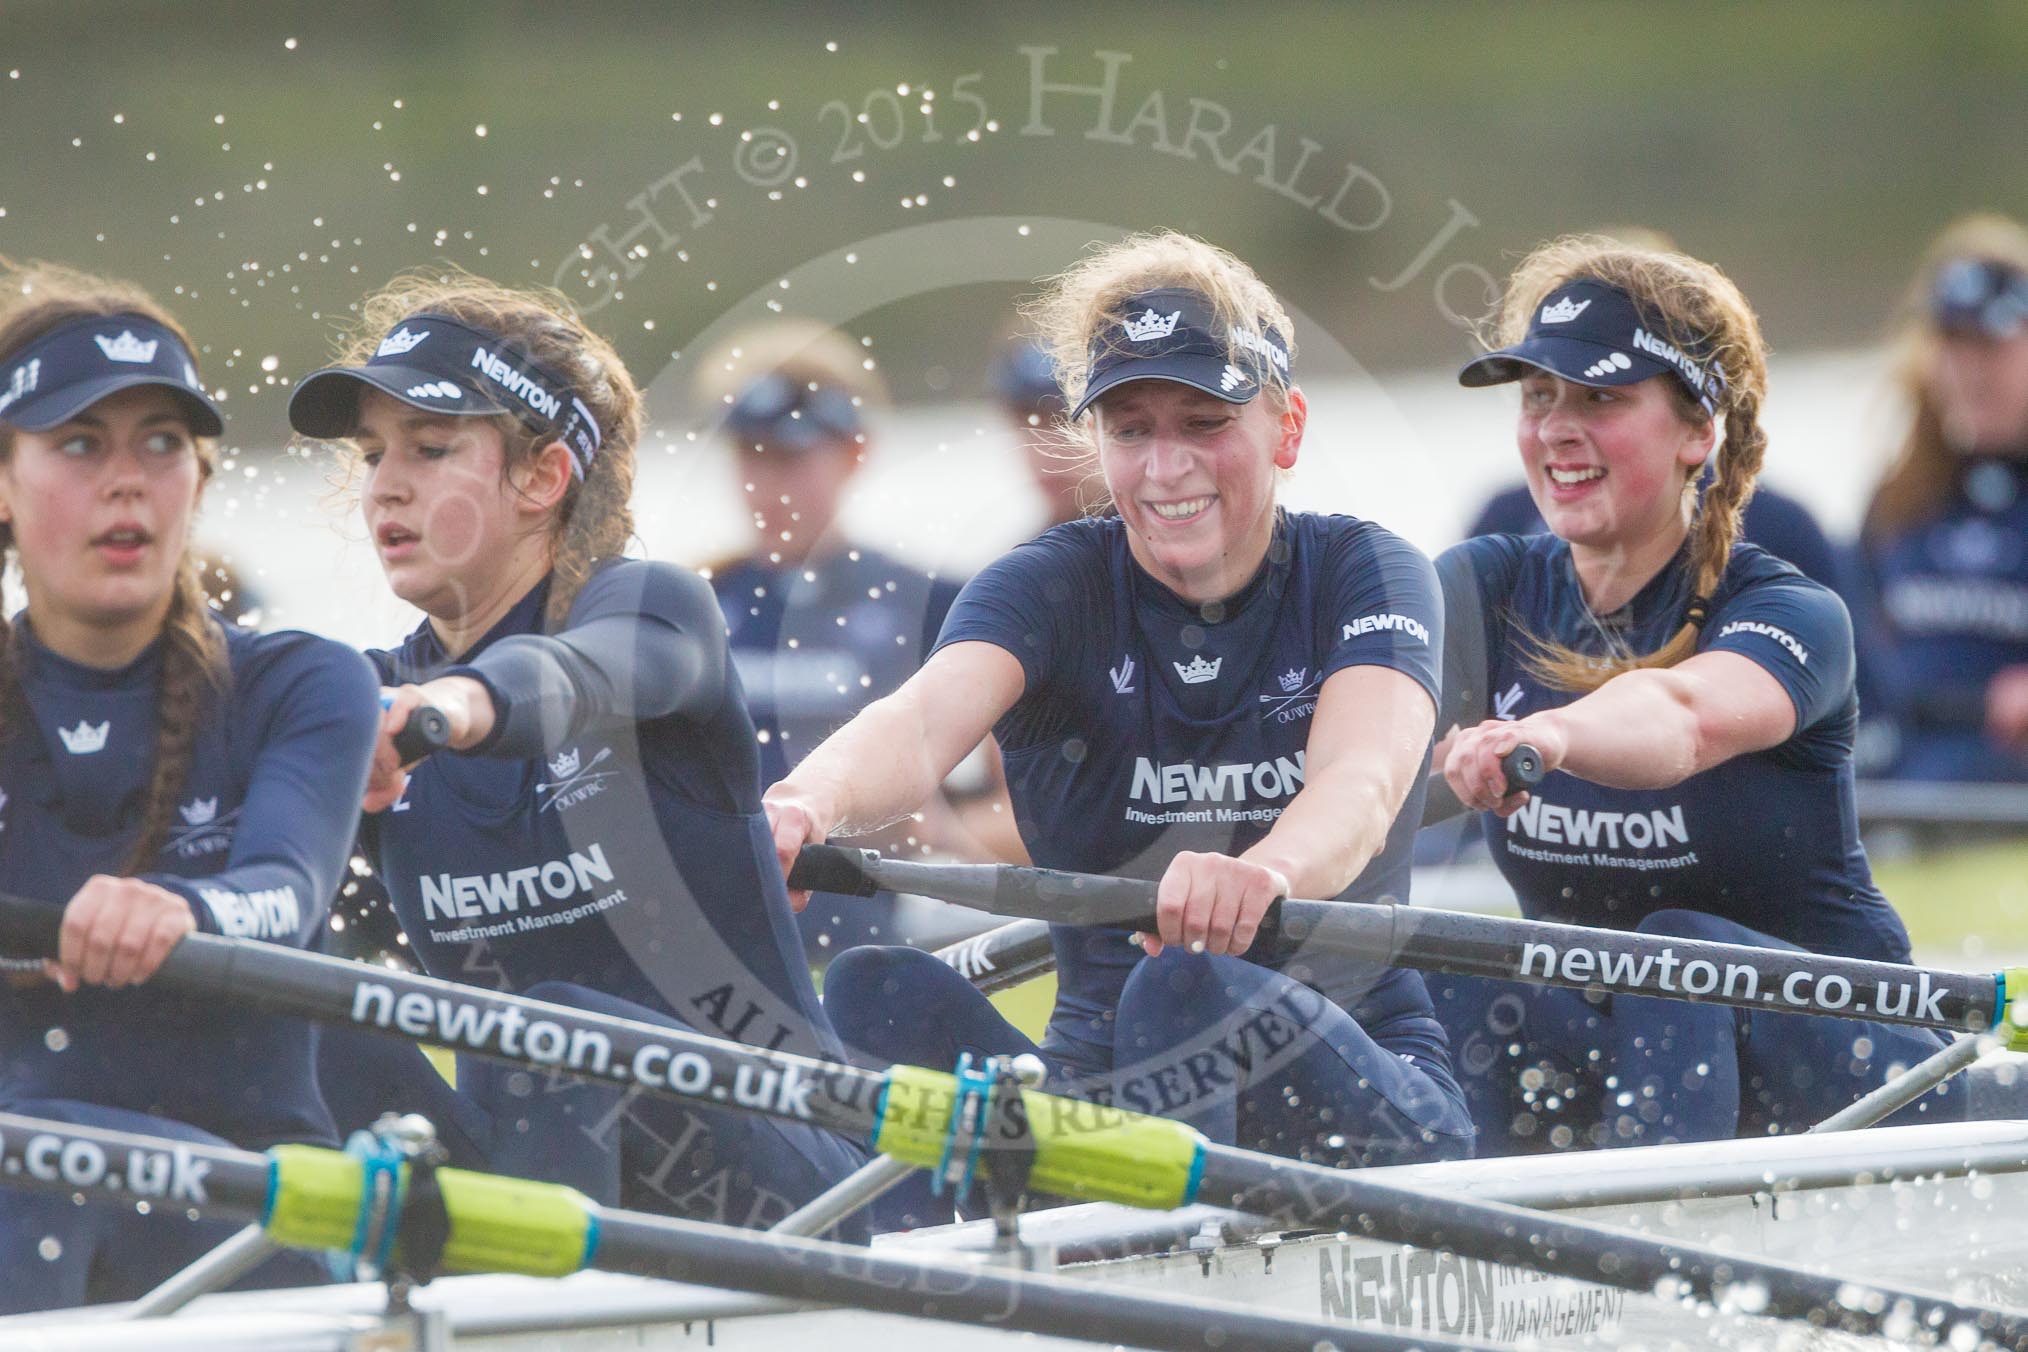 The Boat Race season 2016 - Women's Boat Race Trial Eights (OUWBC, Oxford): "Scylla", here 4-Rebecca Te Water Naude, 3-Elettra Ardissino, 2-Merel Lefferts, bow-Issy Dodds.
River Thames between Putney Bridge and Mortlake,
London SW15,

United Kingdom,
on 10 December 2015 at 12:32, image #274